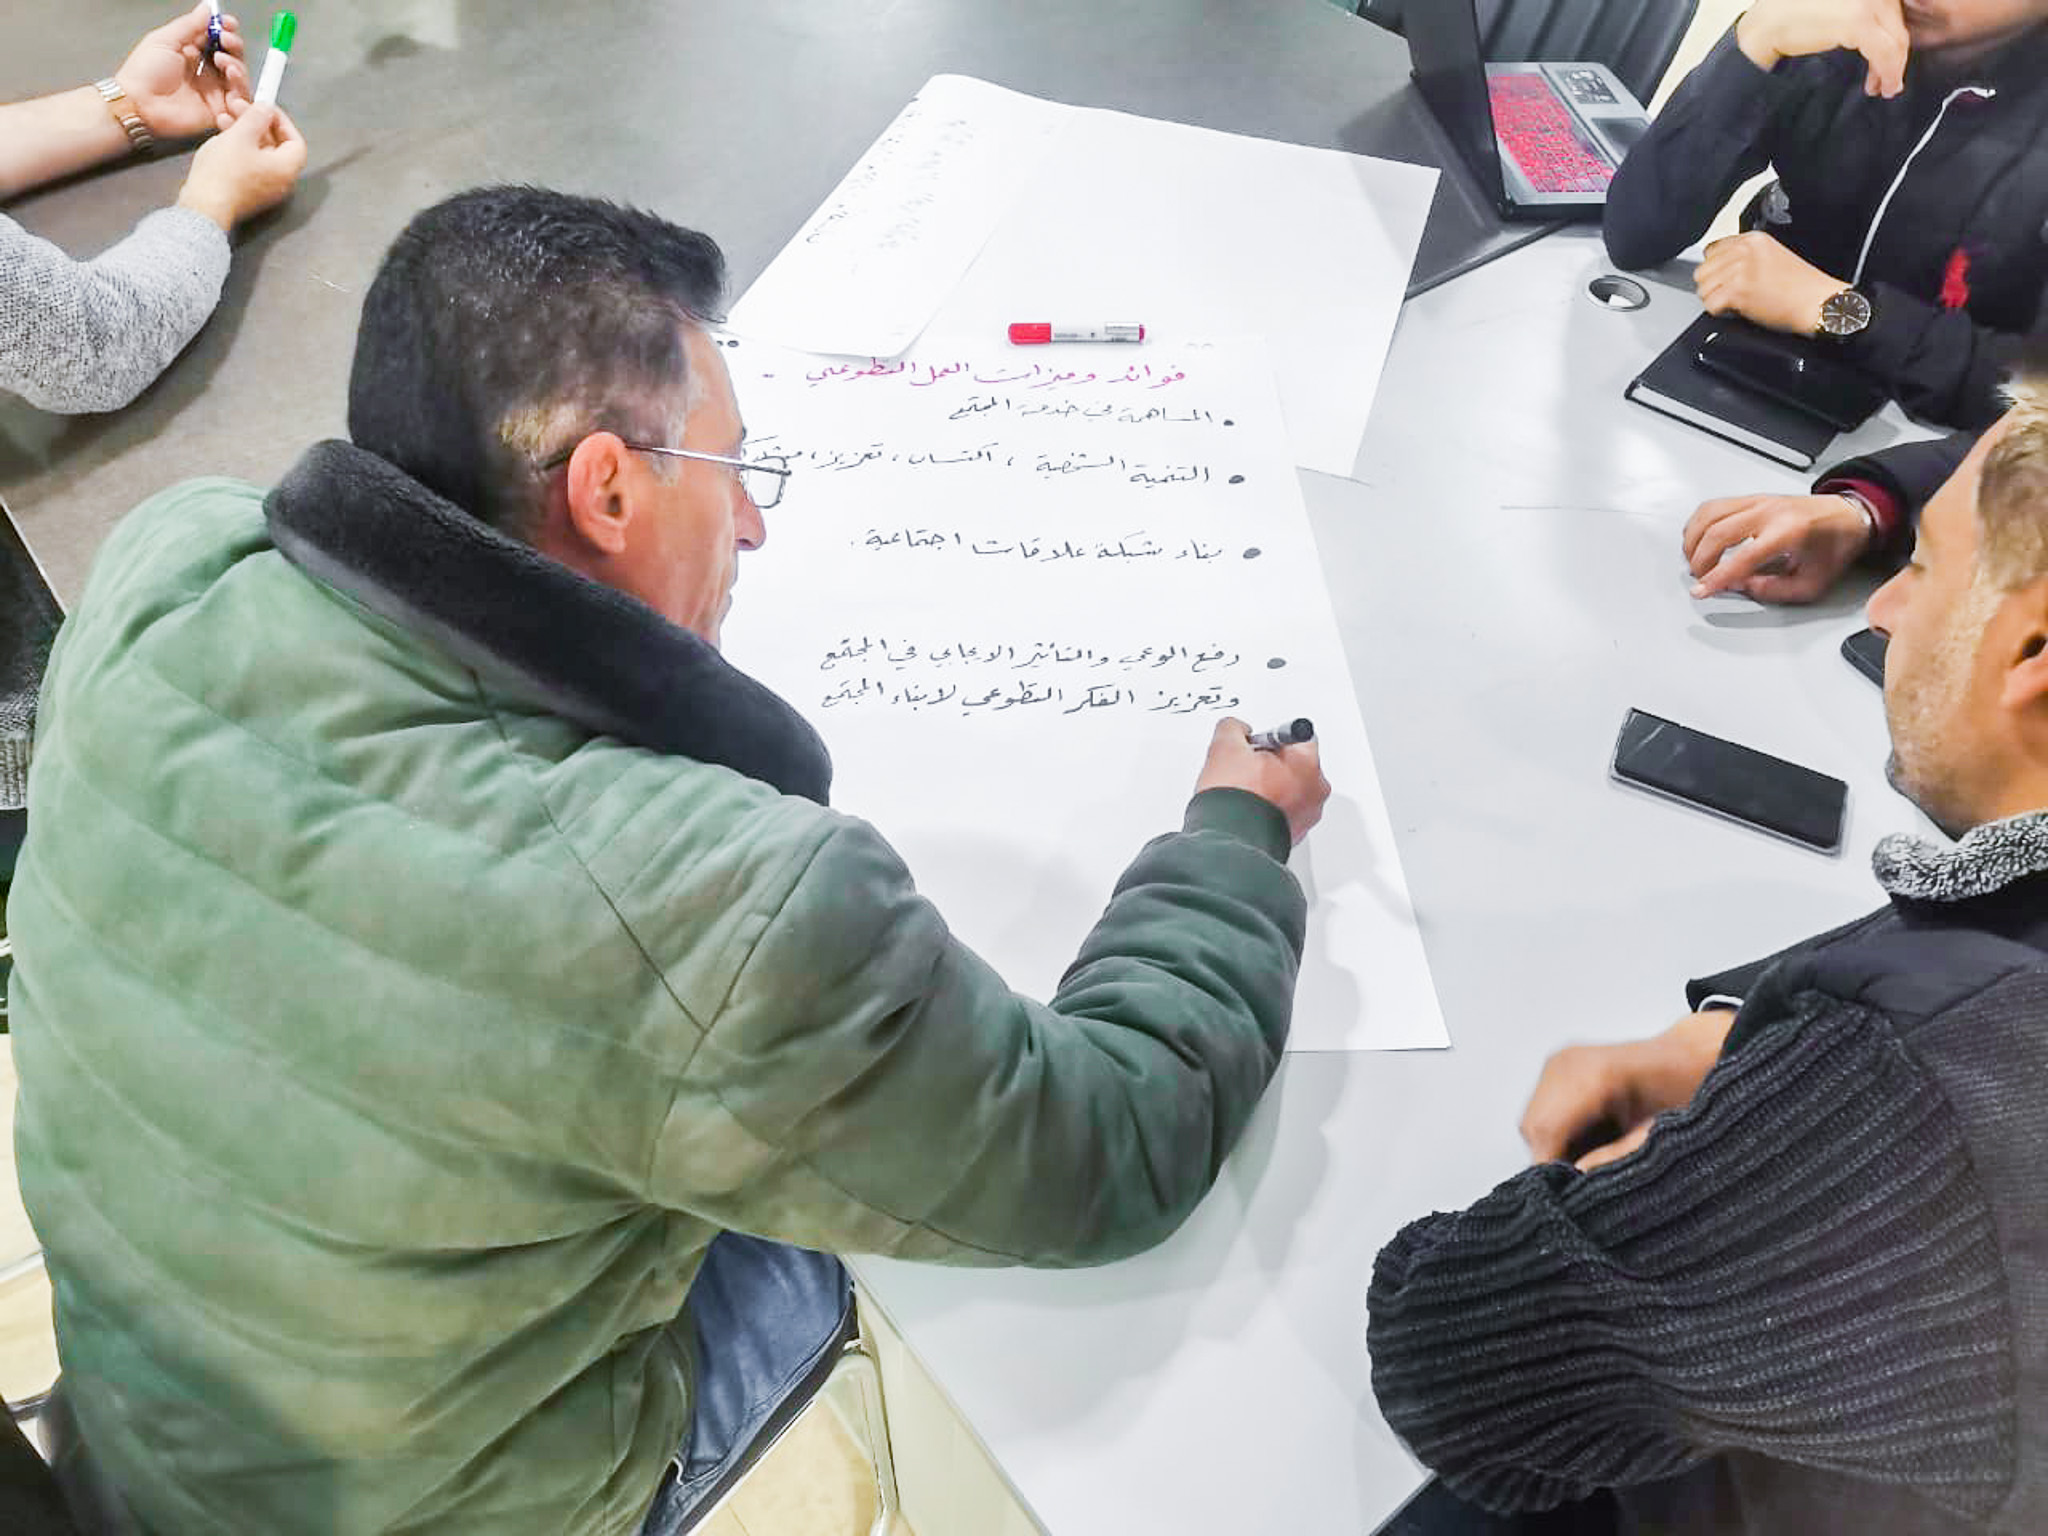 Community Support Networks at Za’atari Refugee Camp Provide Leadership Opportunities